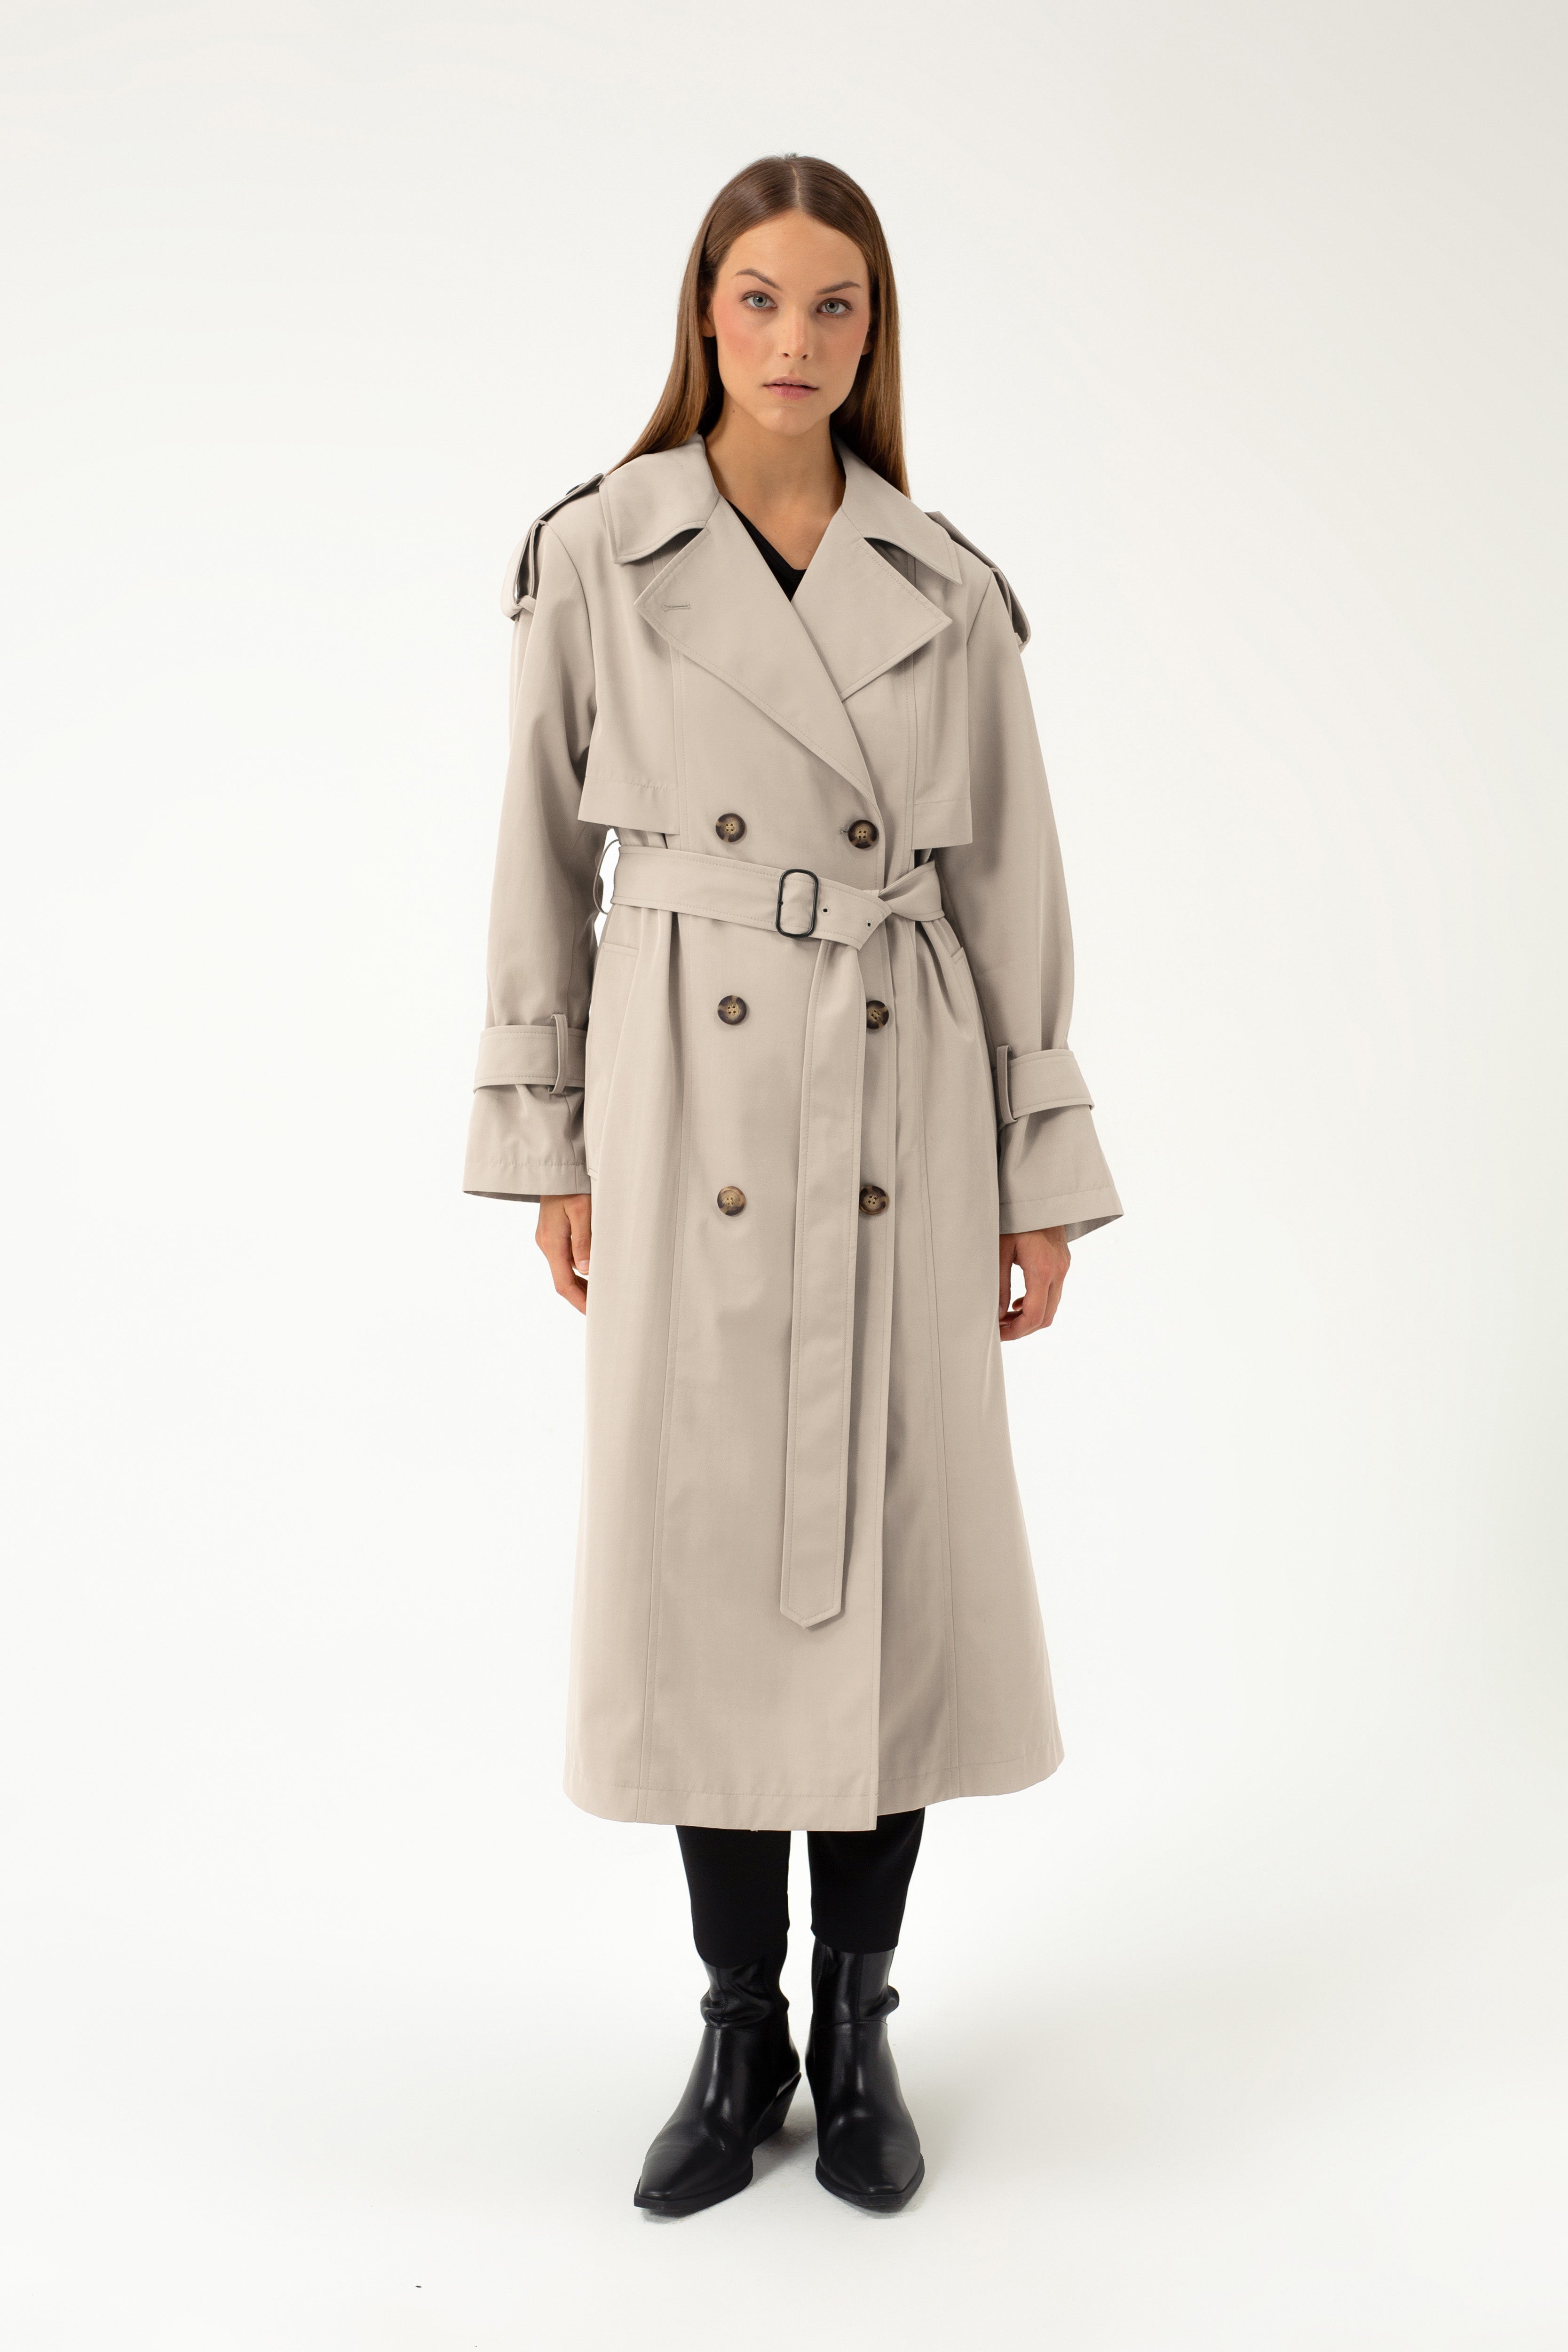 BEIGE TRENCHCOAT WITH DECORATIVE BELTS